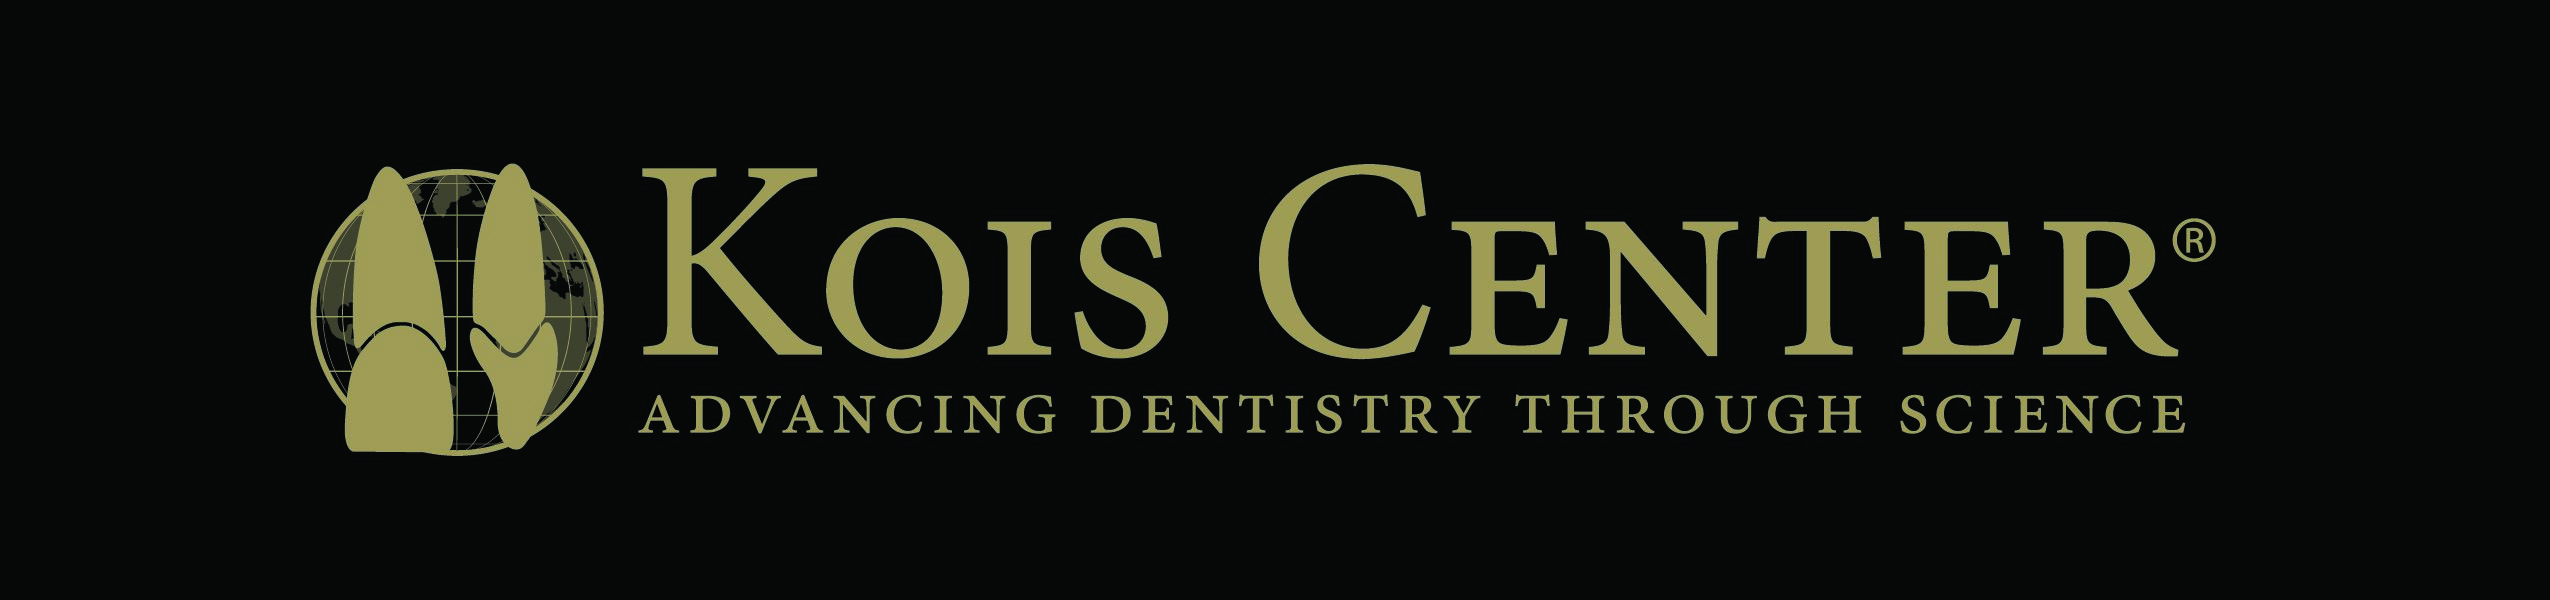 Kois Center Logo Gold With Tagline And Continents Black Background